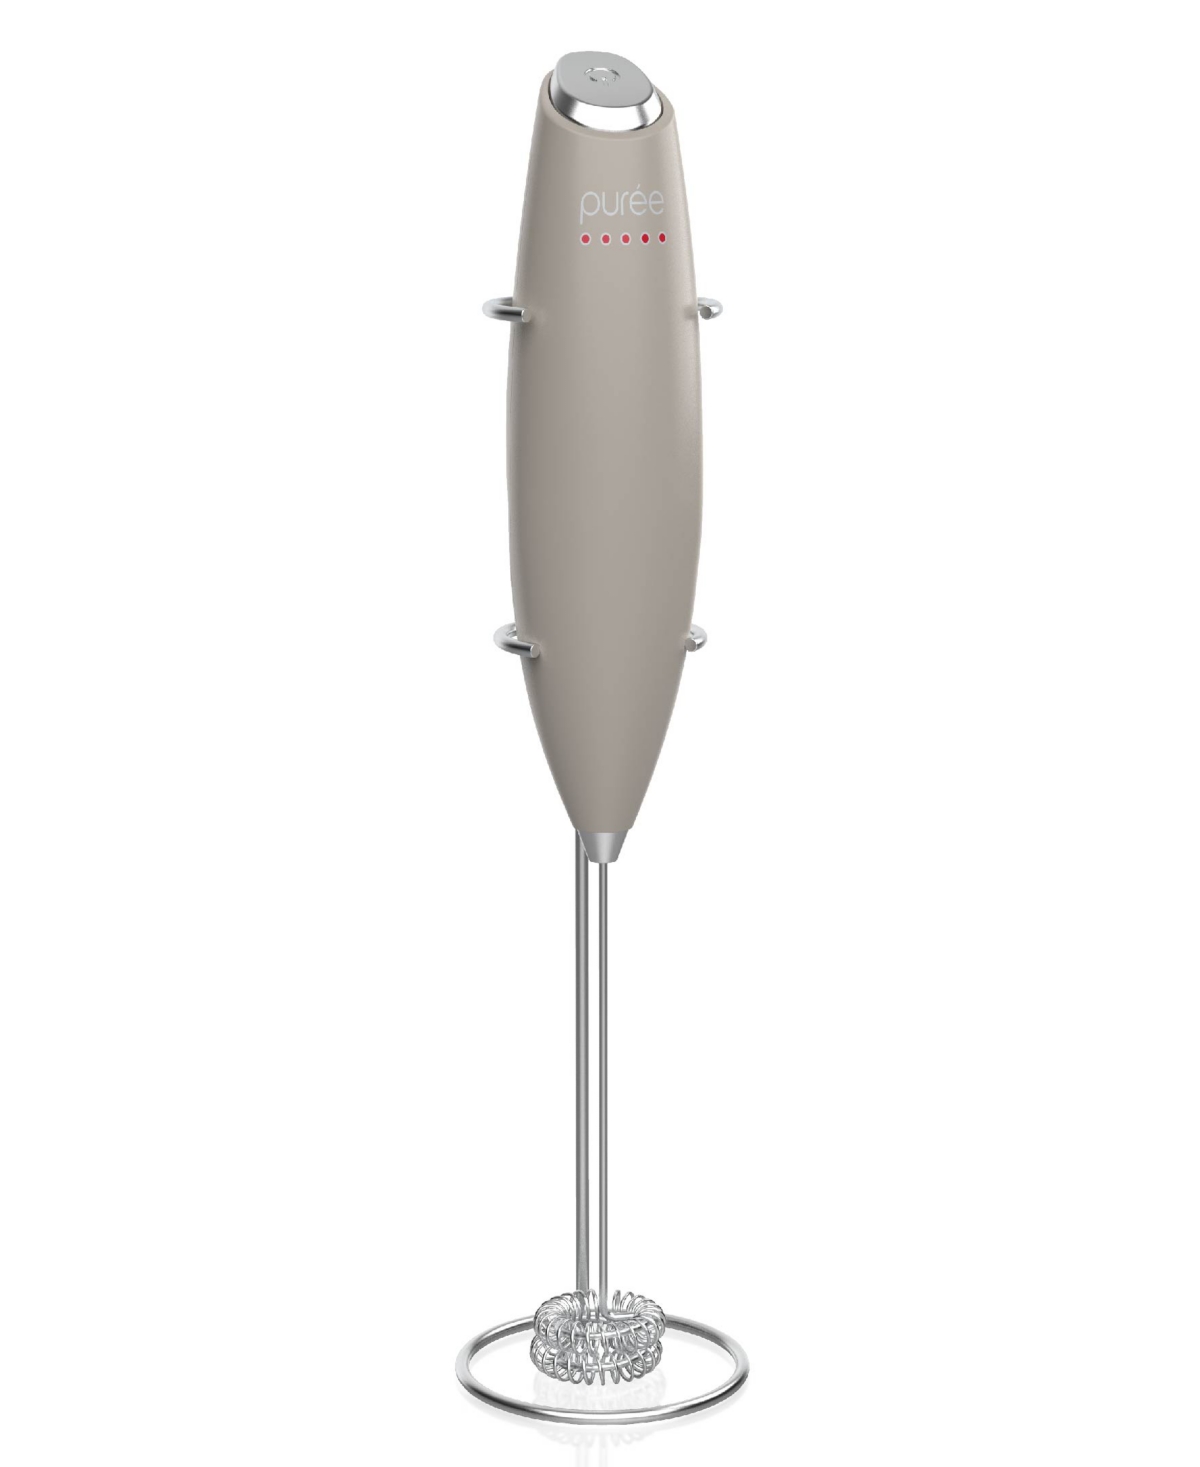 Tzumi Puree Milk Frother, Battery-powered Handheld Milk Frother Wand In Gray